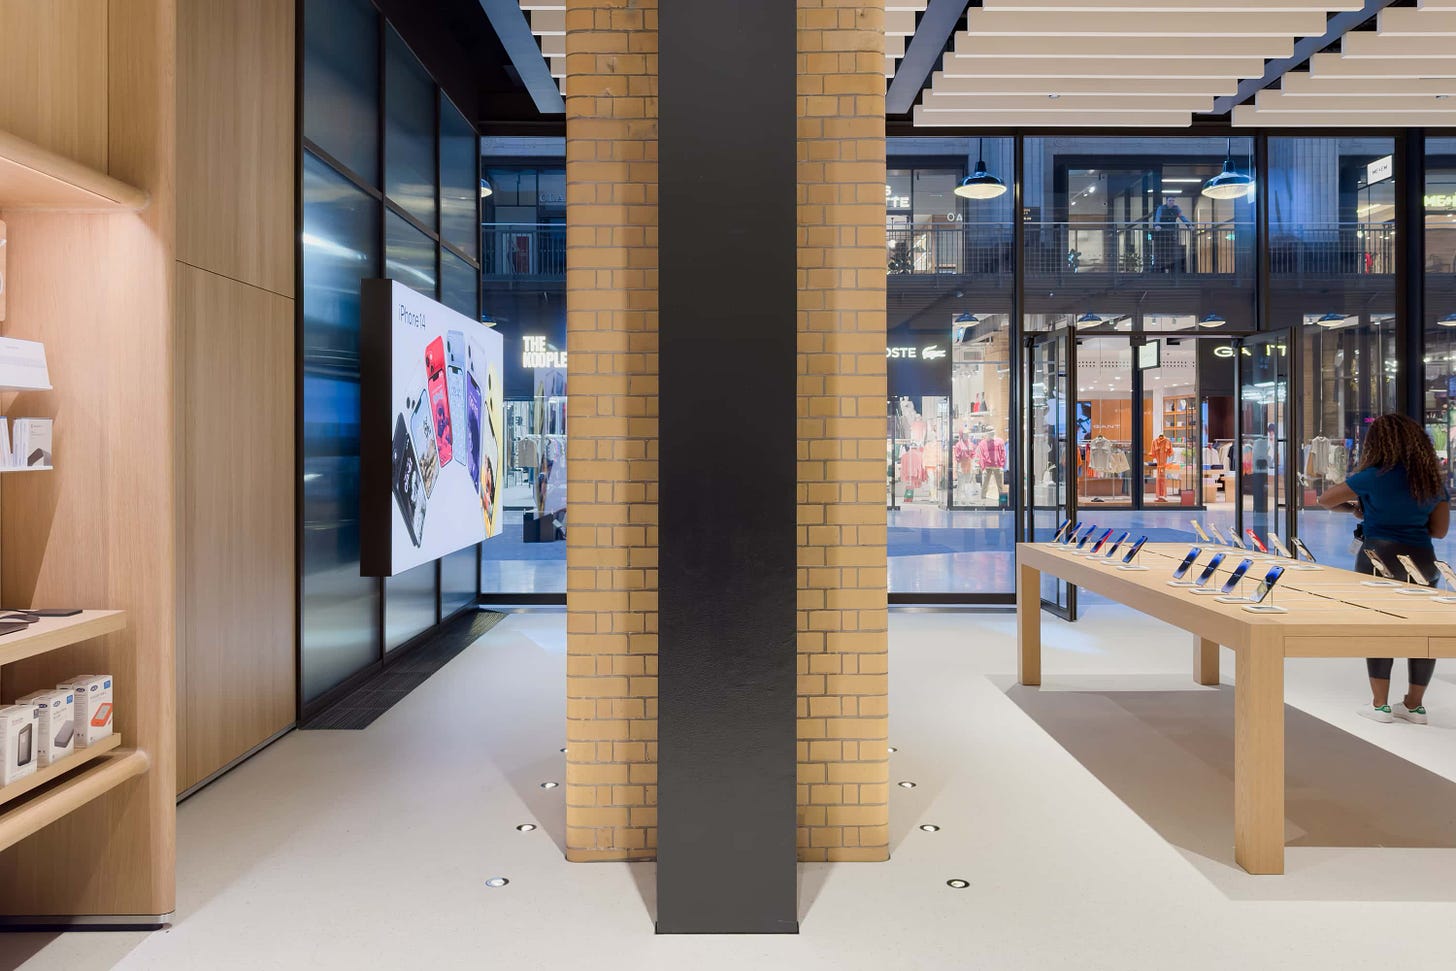 A large steel column sits behind a restored brick column at Apple Battersea. A backlit graphic panel hangs against a glass wall in the distance.